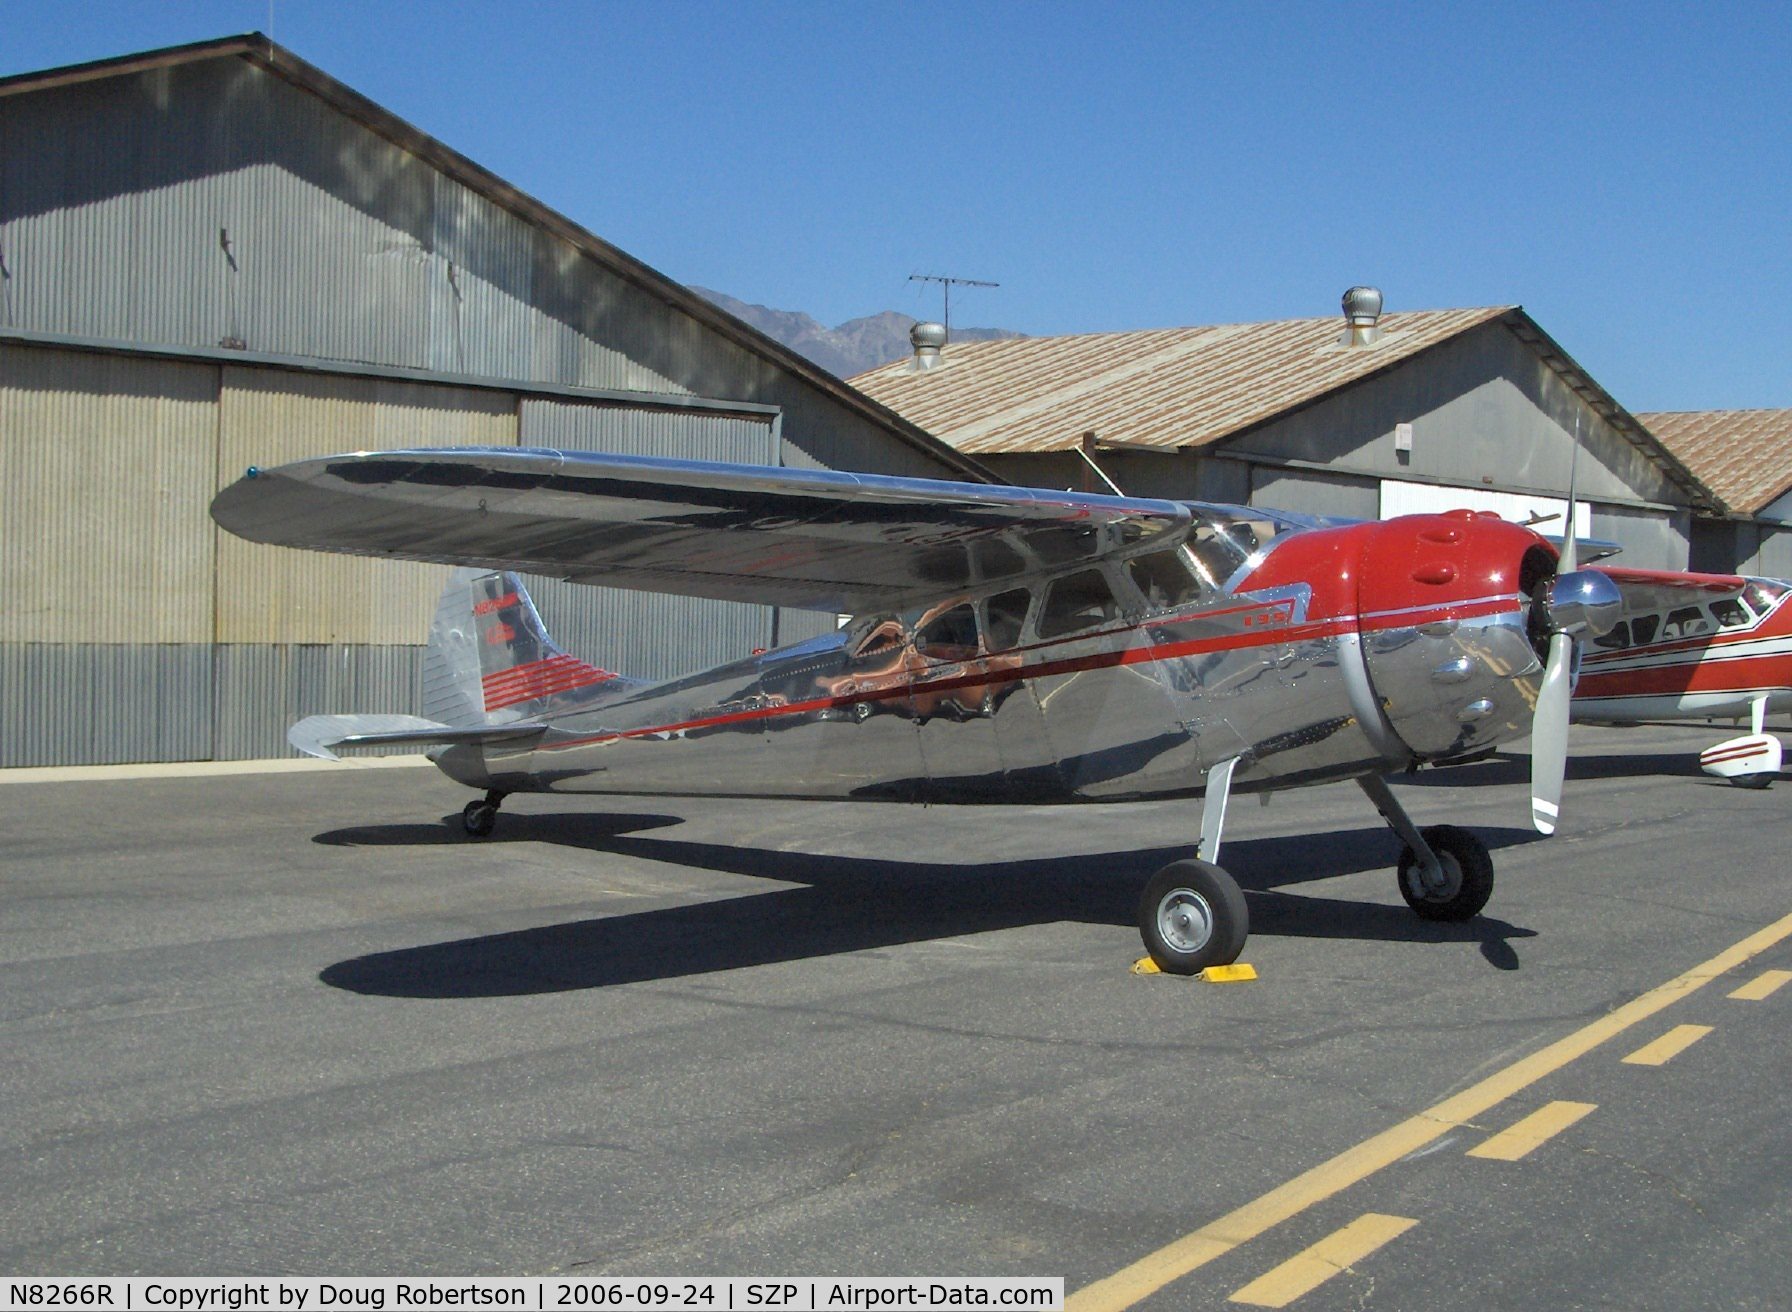 N8266R, 1949 Cessna 195 C/N 7550, 1949 Cessna 195A BUSINESSLINER, Jacobs R755A 300 Hp, absolutely stunning polished finish